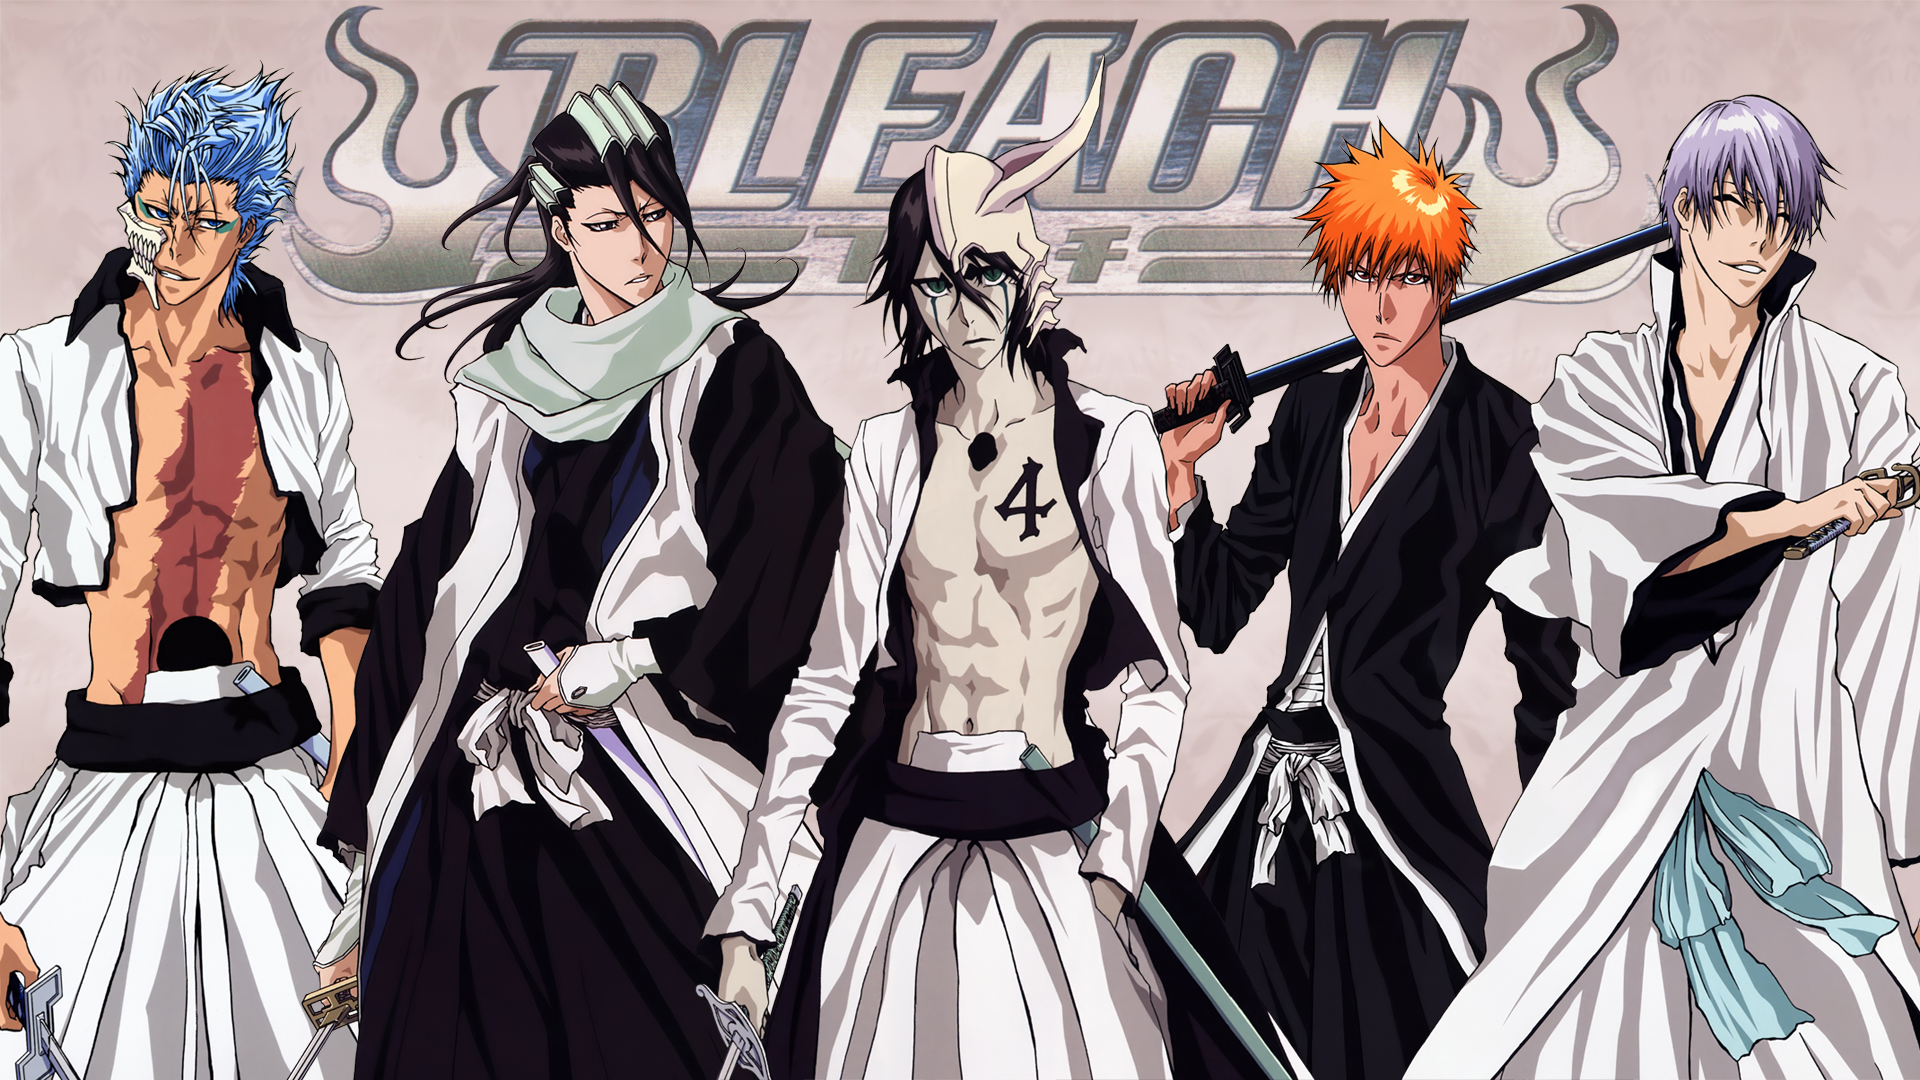 Pic. #Anime #Wallpapers #Helion #Bleach #Animepaper, 109206B – Anime  wallpapers and pics